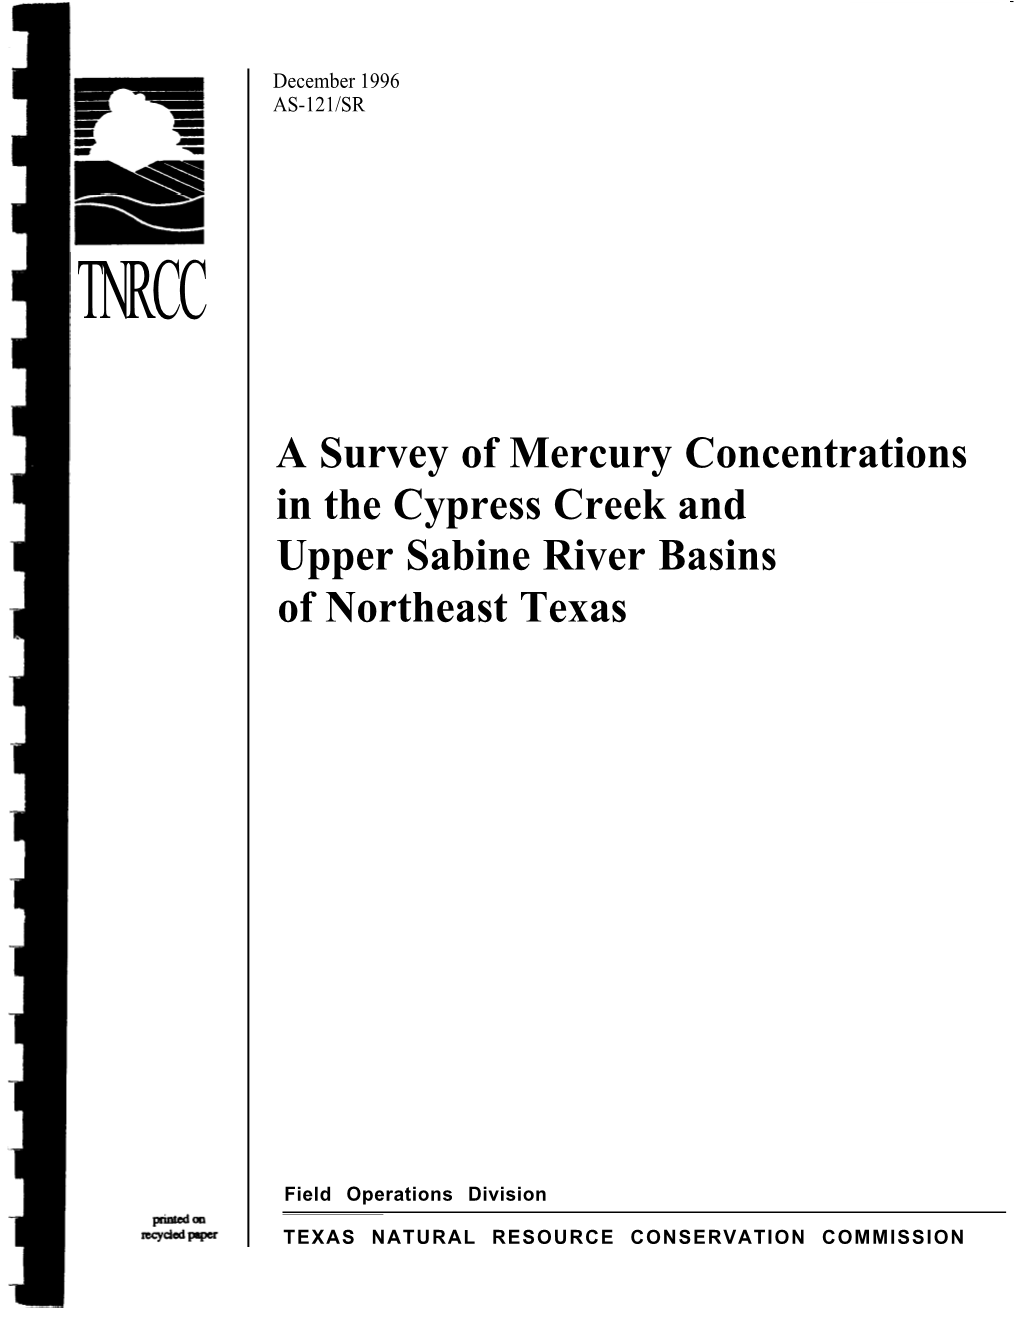 A Survey of Mercury Concentrations in the Cypress Creek and Upper Sabine River Basins of Northeast Texas